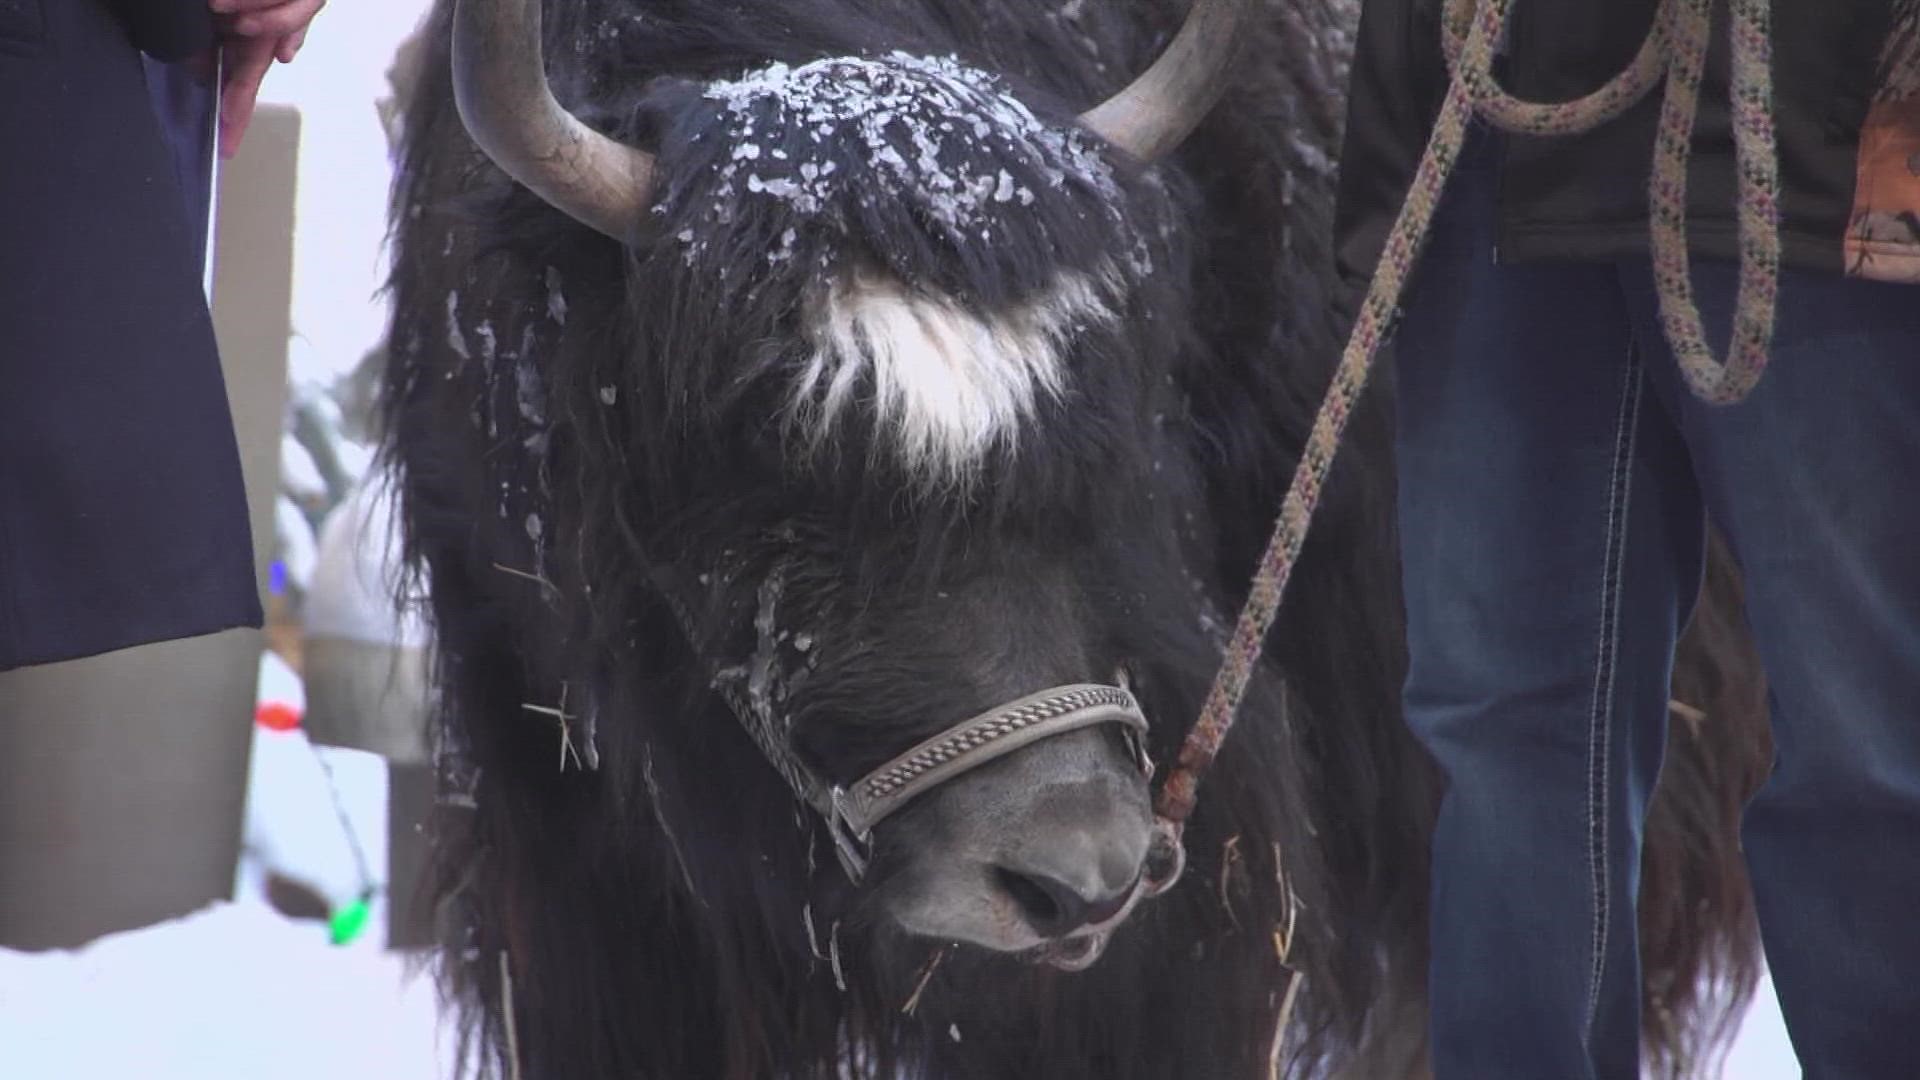 It's the final weekend to see all the animals, including the yaks, at the National Western Stock Show.